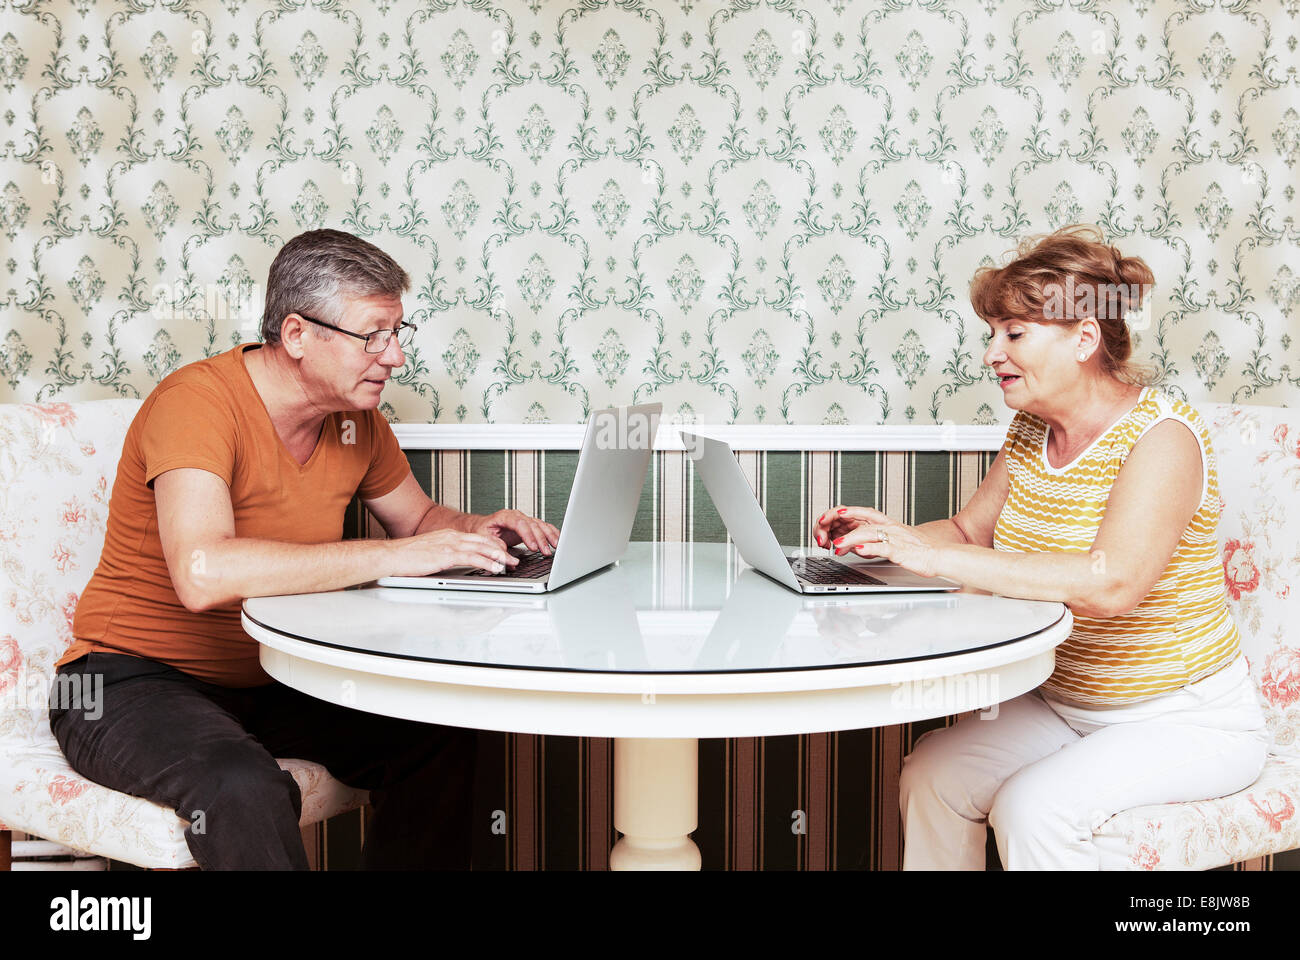 Middle-aged man and mid-adult woman sitting opposite to each other using laptops Stock Photo